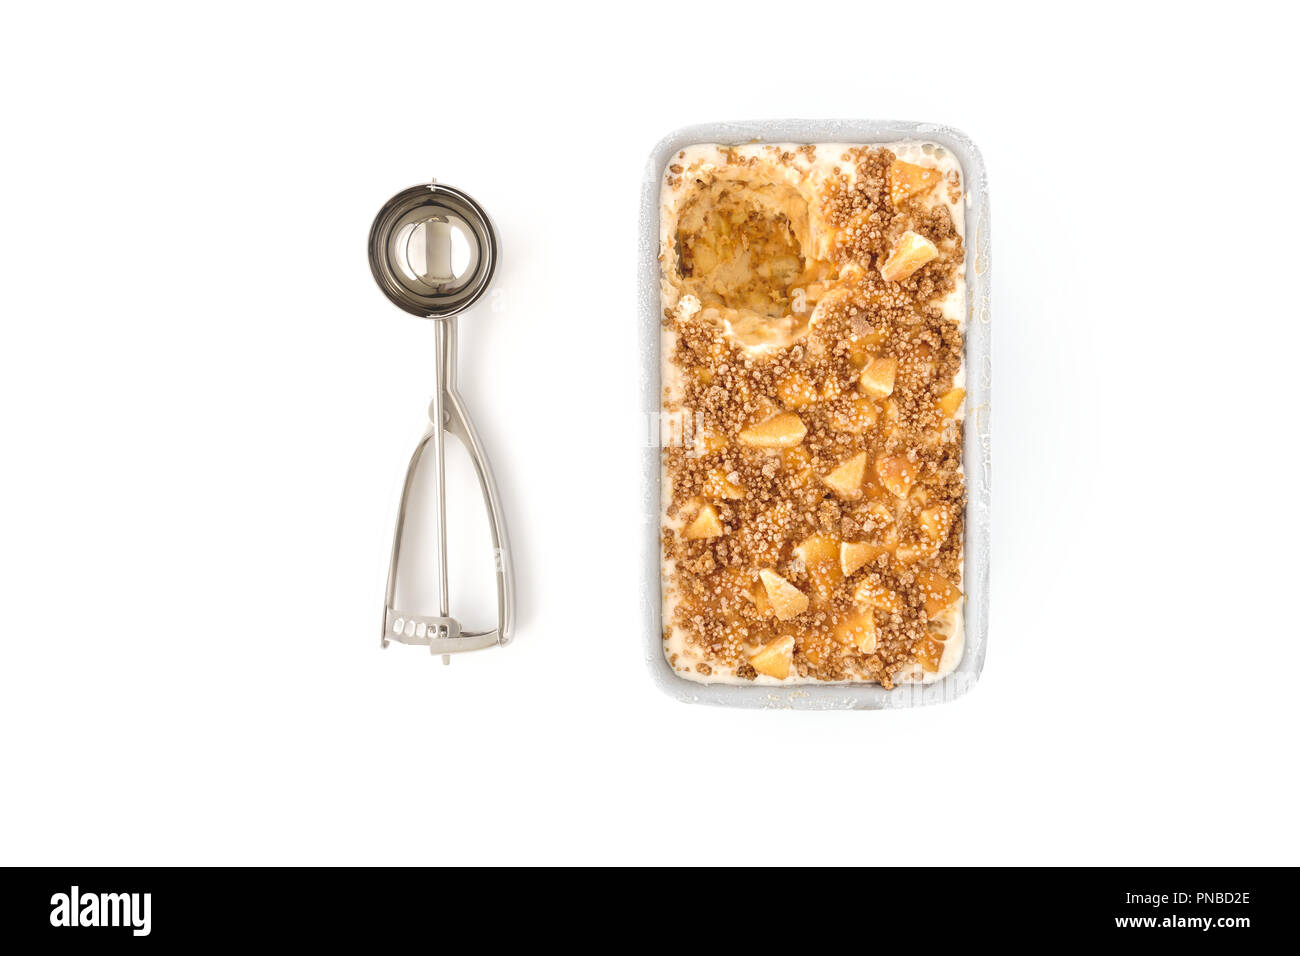 Homemade Toffee Apple Ice Cream in a metal container and an Ice Cream Scoop on white background. Stock Photo